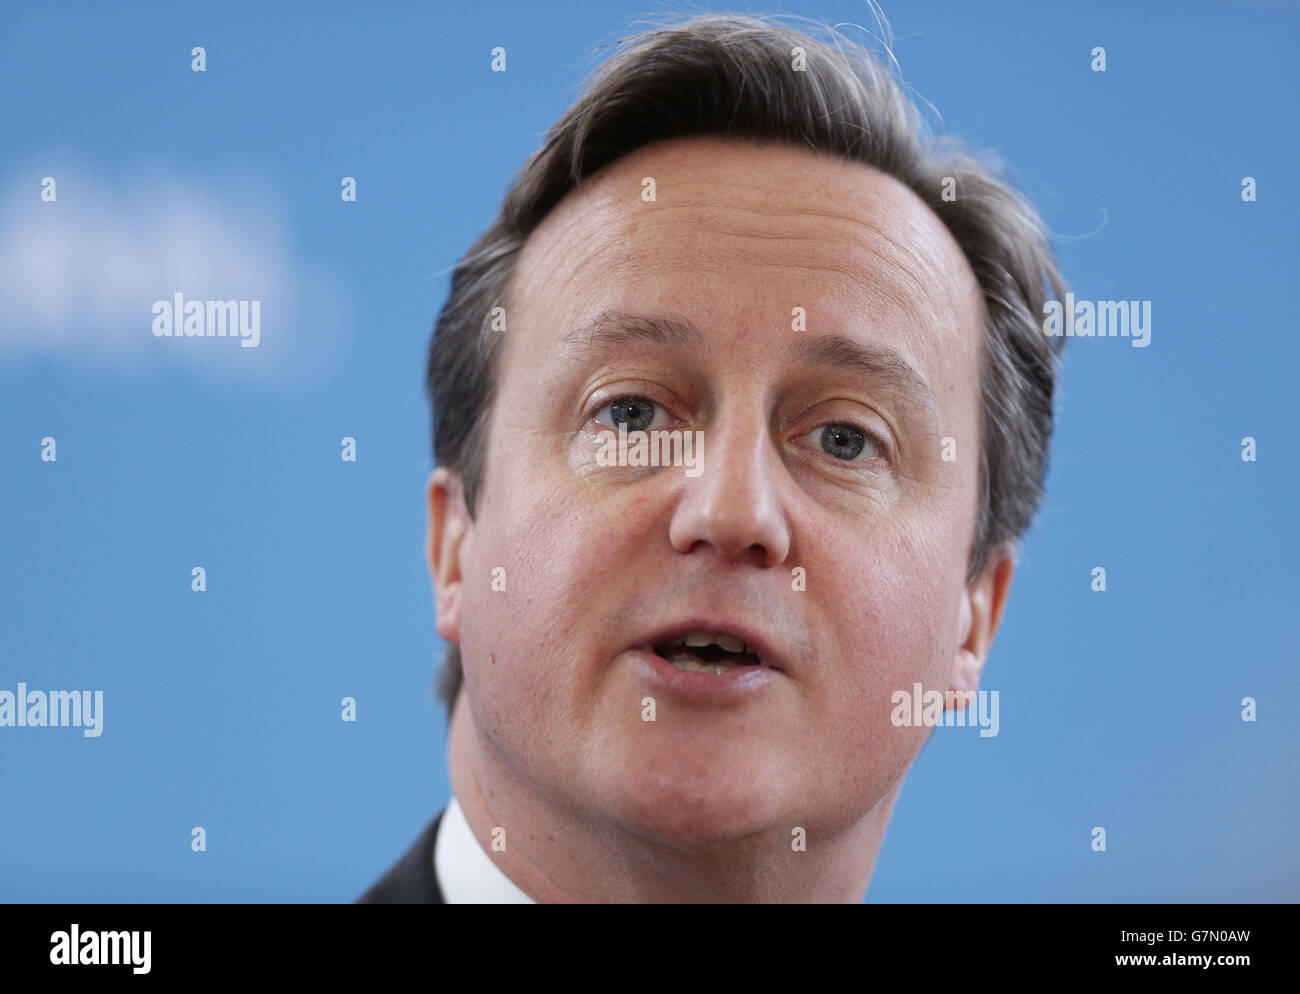 Prime Minister David Cameron speaking during a visit to Kingsmead School in Enfield, London. Stock Photo